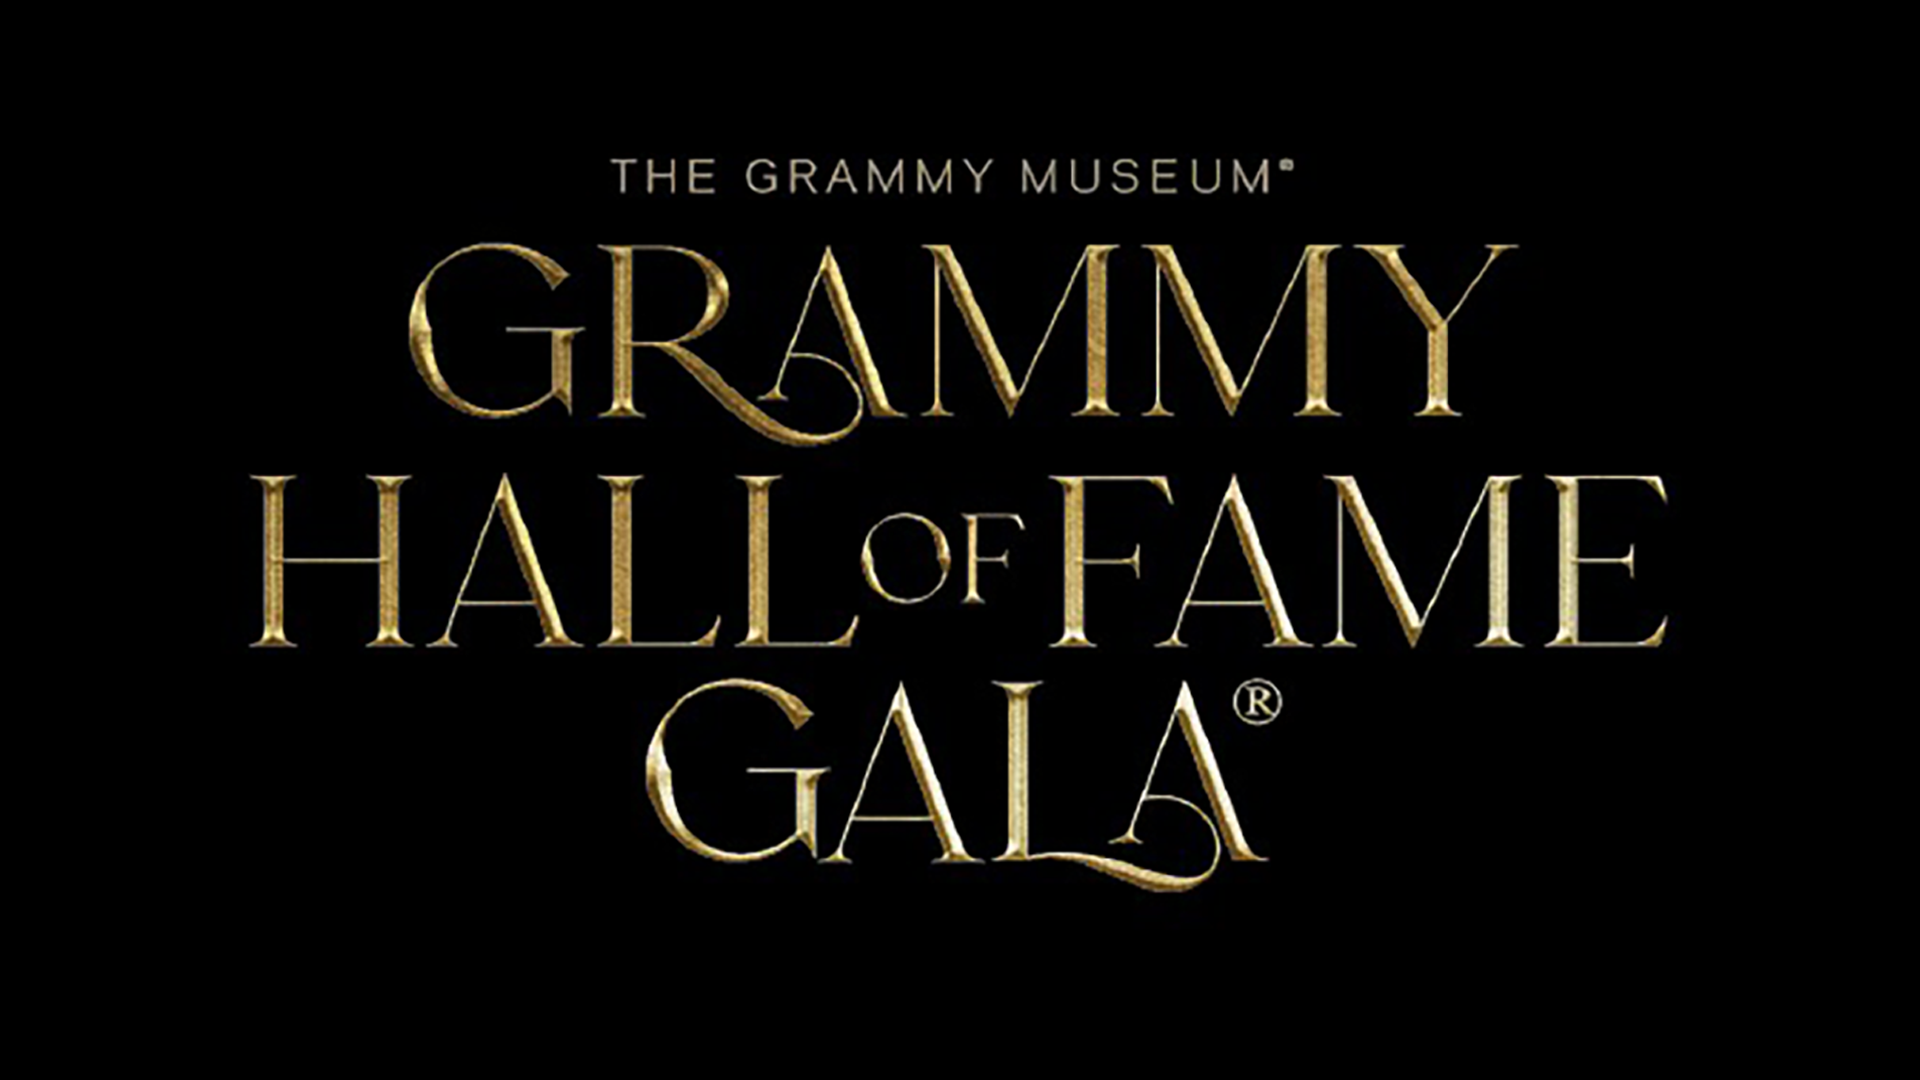 GRAMMY Hall of Fame Gala Red Carpet Highlights